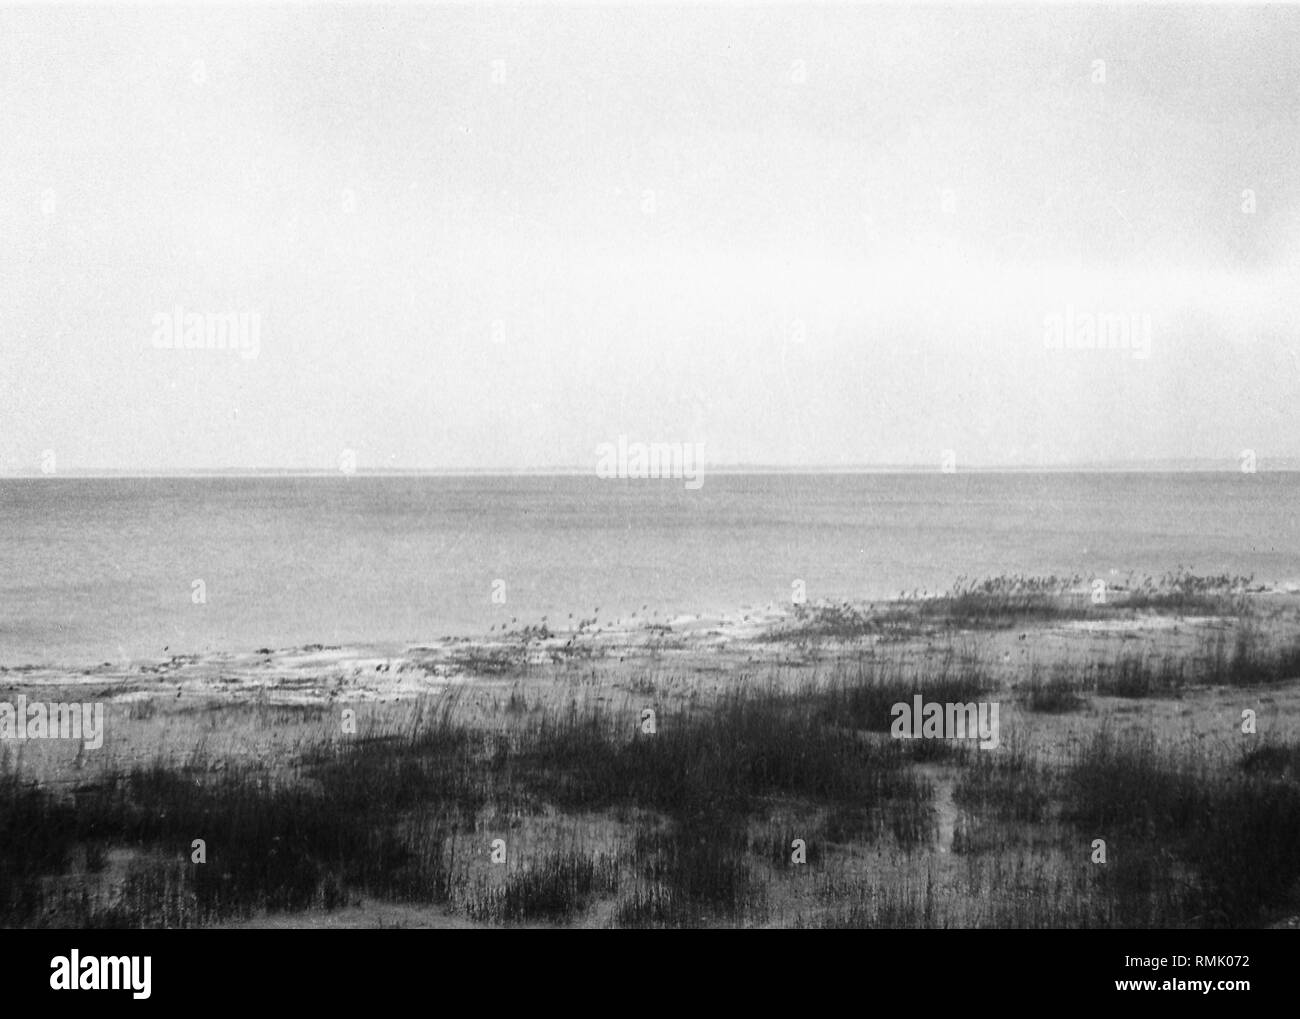 View from the Vistula Spit on the Gdansk Bay. At the beginning of February 1945, refugees attempt to flee across the ice of the Vistula Lagoon to the Vistula Spit to reach the Baltic Sea coast of Gdansk. The picture was taken by Theodor Vonolfen, the soldier of a Luftwaffe unit, deployed there at that time. Stock Photo